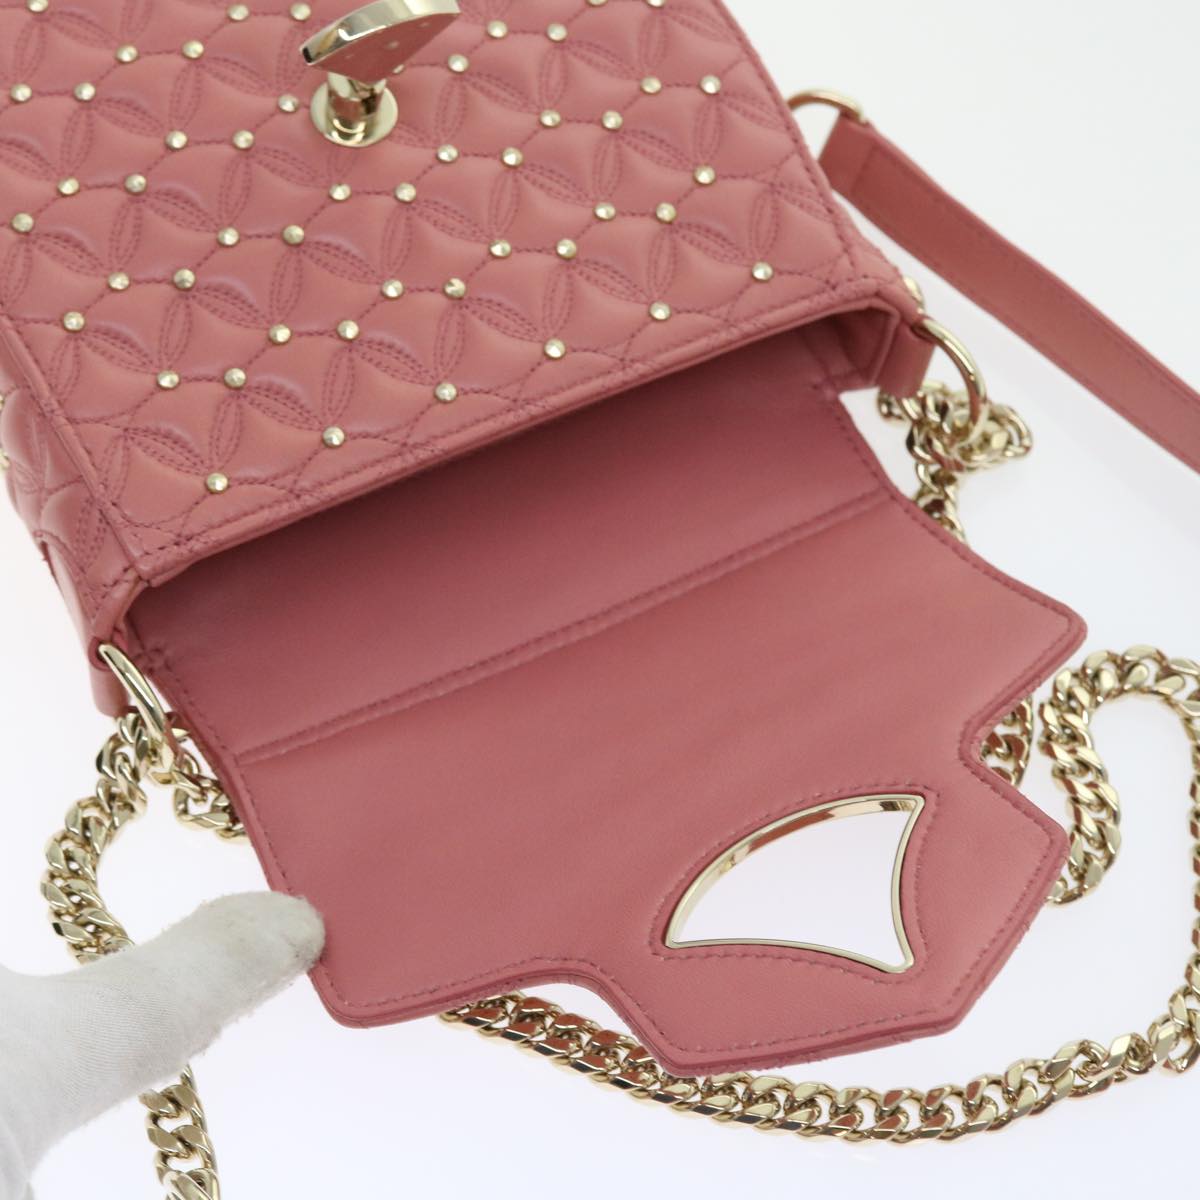 Bvlgari Shoulder Bag Leather Pink 385430 Auth 56753a